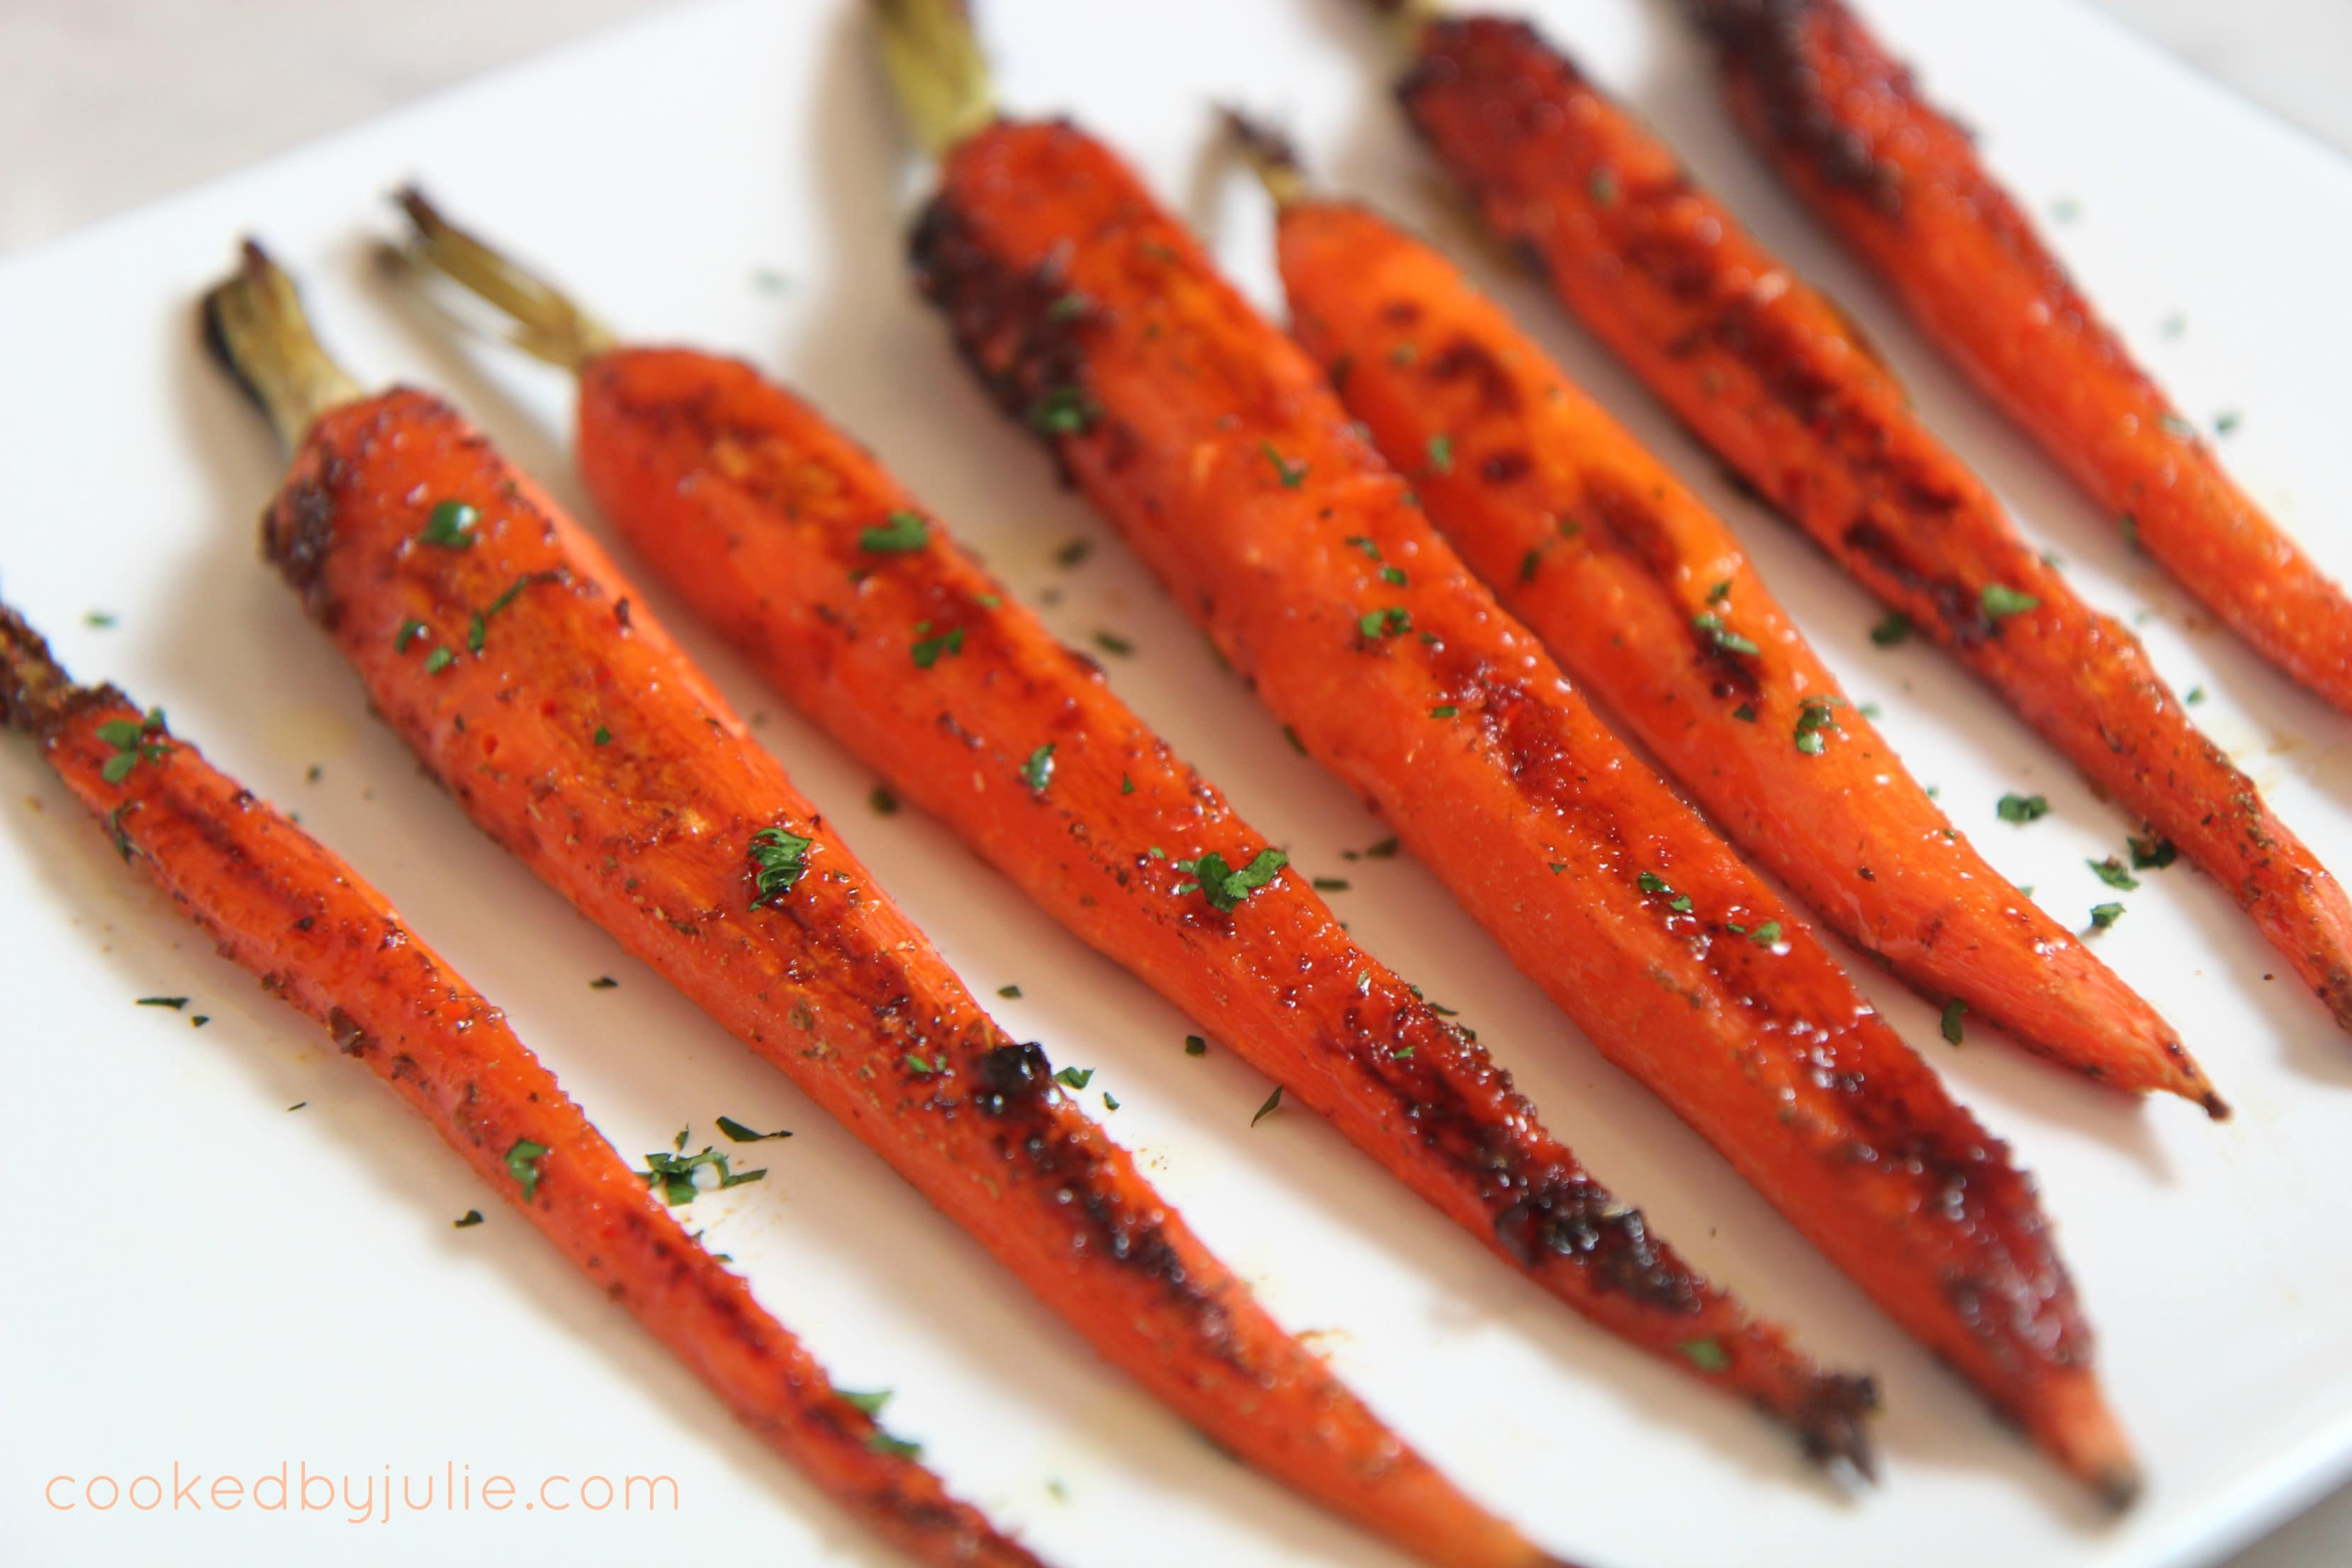 honey garlic carrots sprinkled with fresh parsley - a delicious and easy holiday side dish